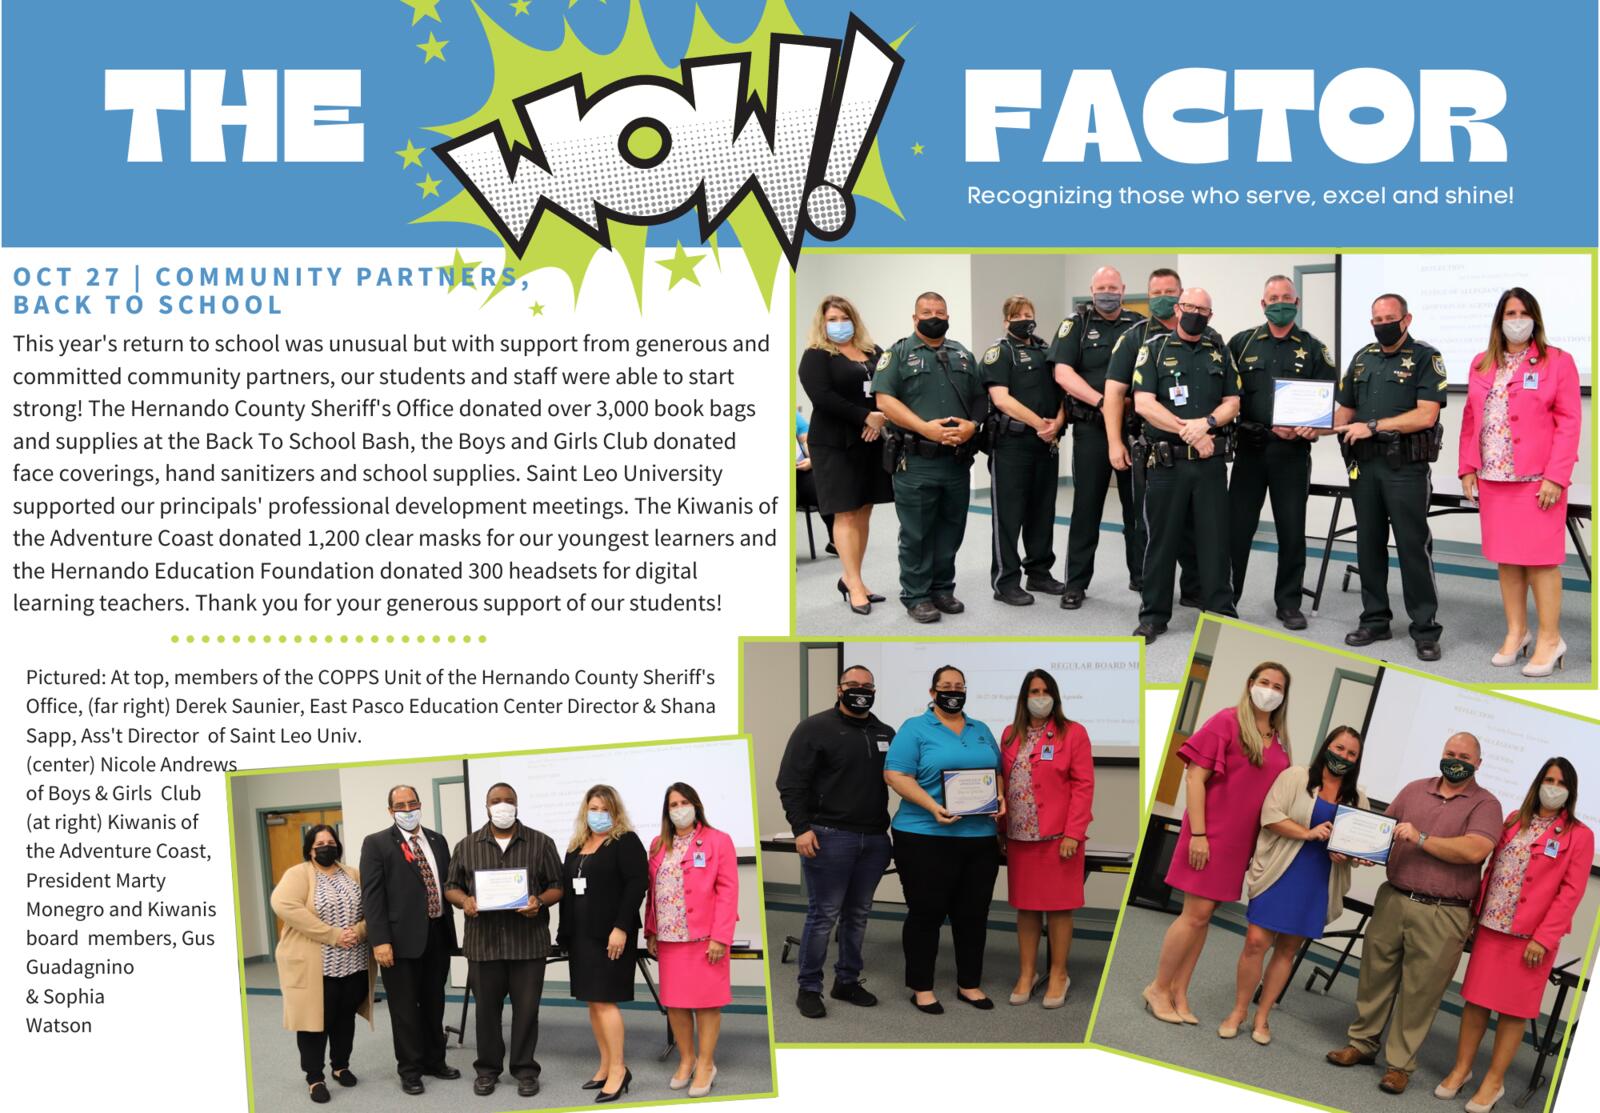 The WOW Factor - Oct 27 - Community Partners